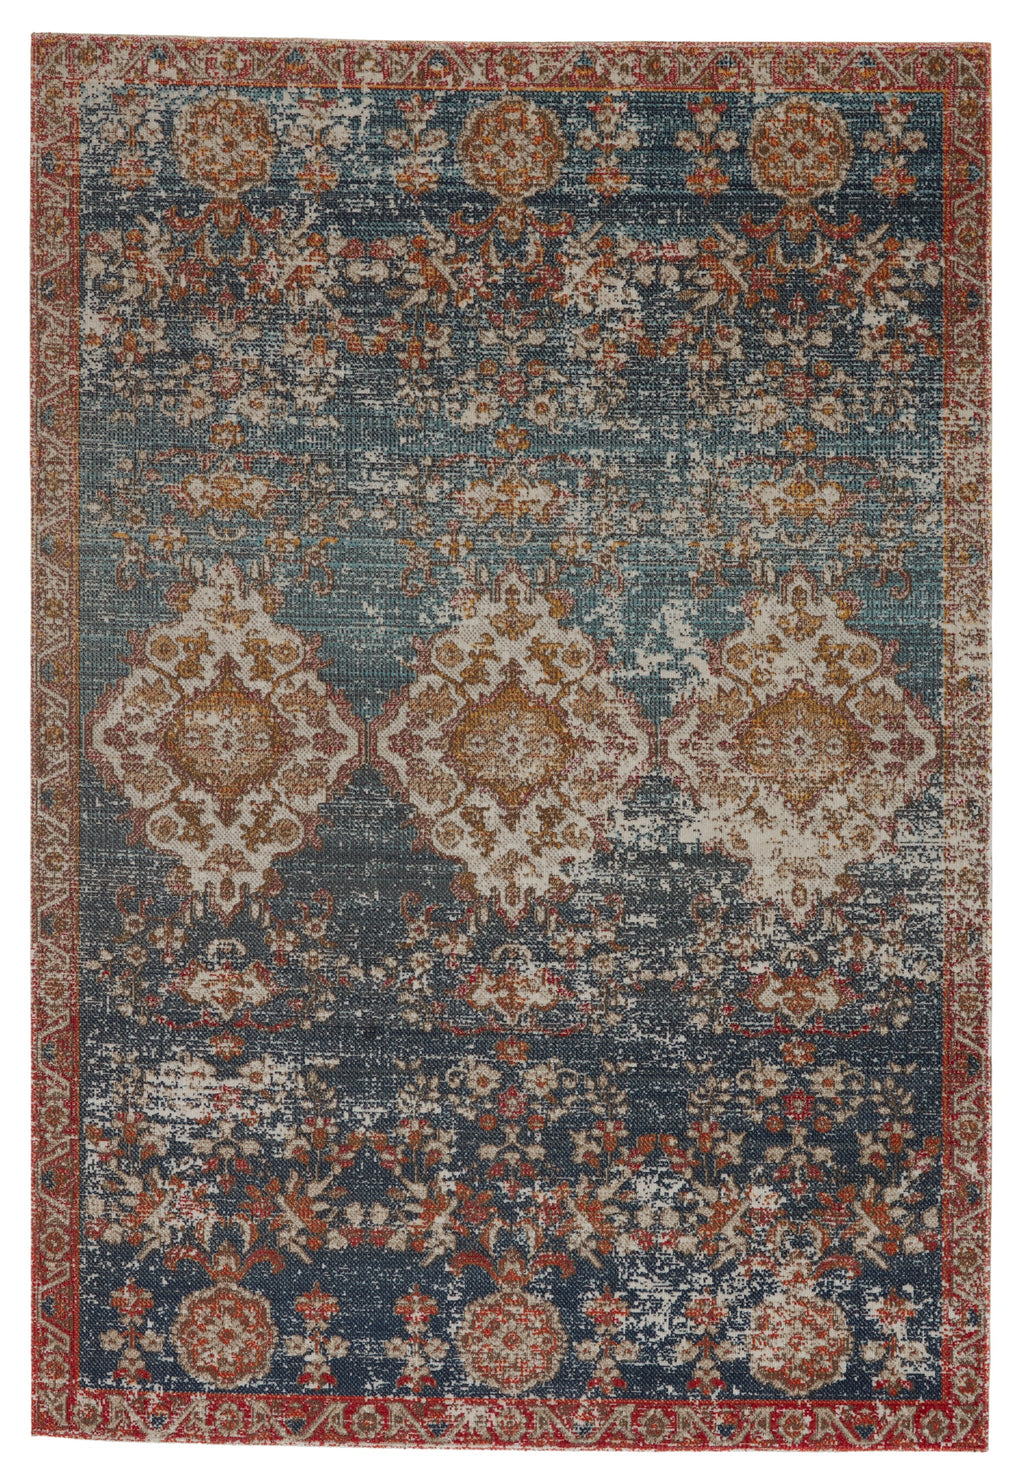 Freemond Indoor/Outdoor Medallion Rug in Blue & Red by Jaipur Living